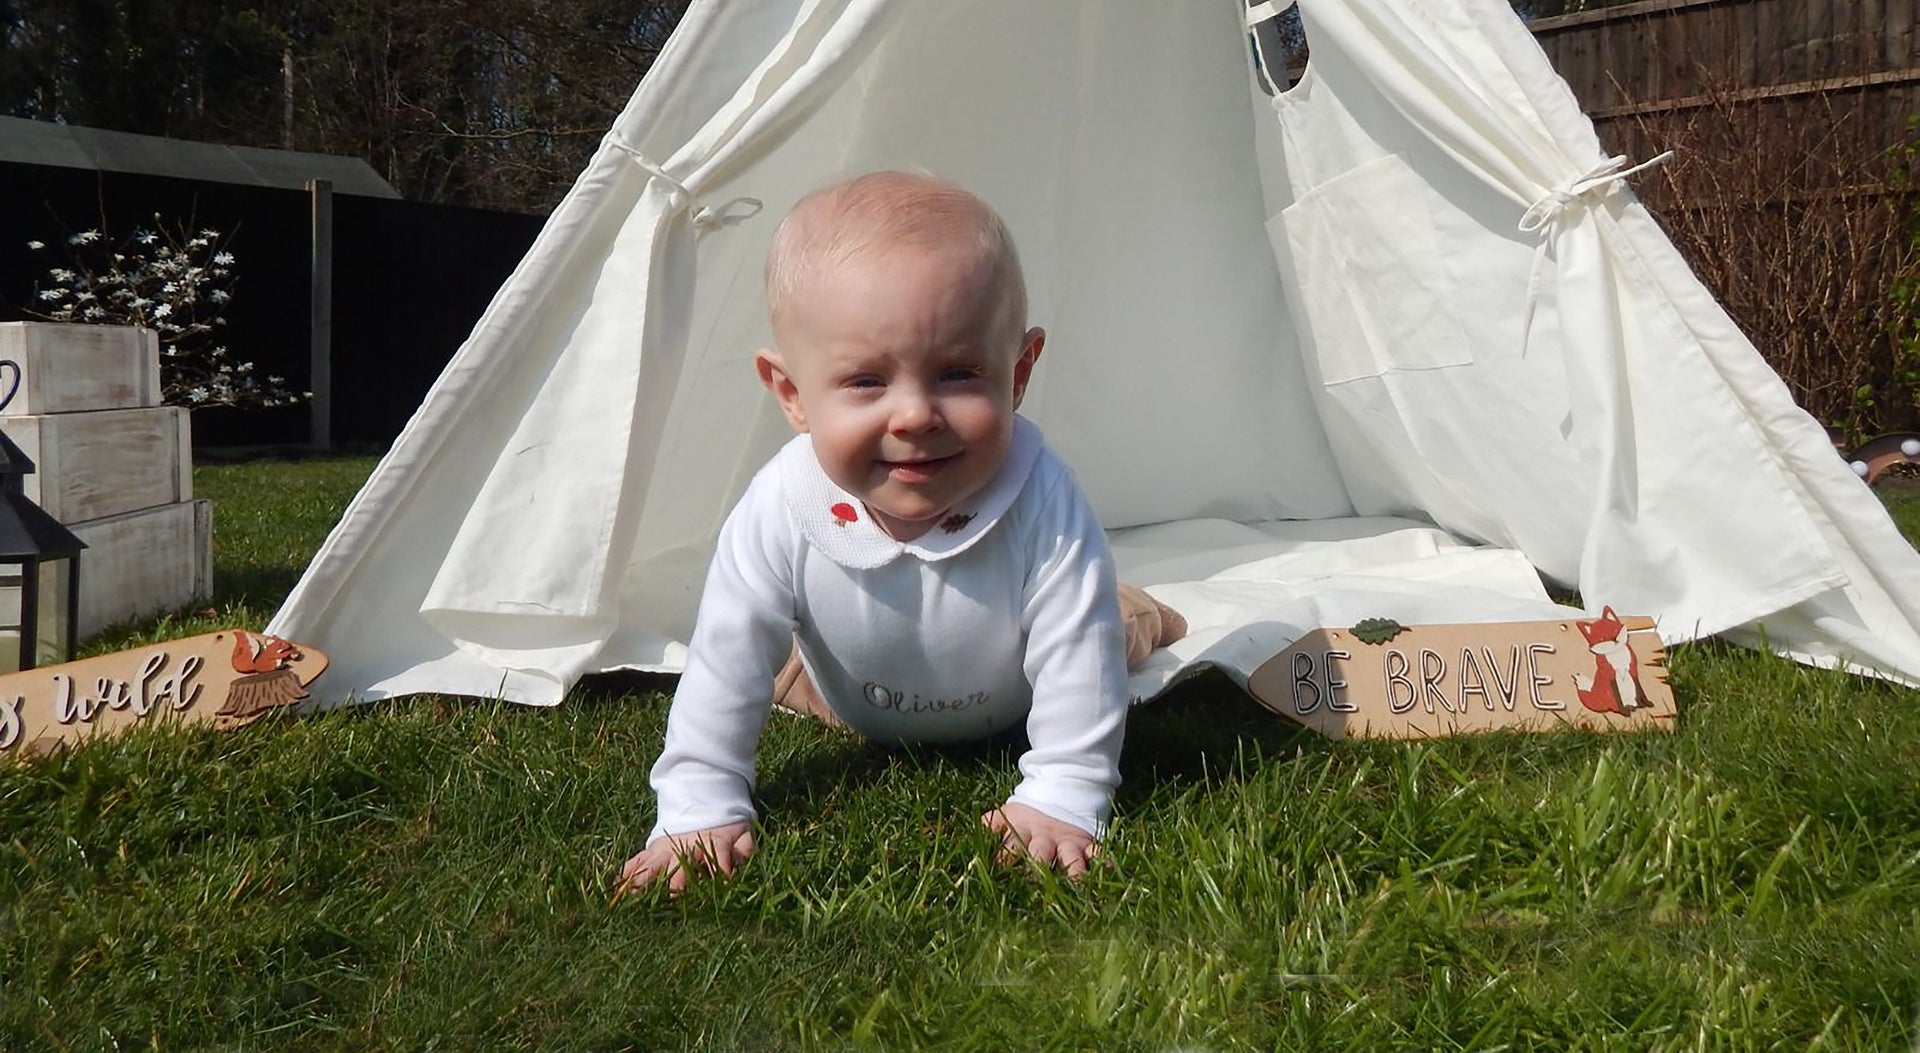 Olive as a baby crawling from a white play tent in the garden